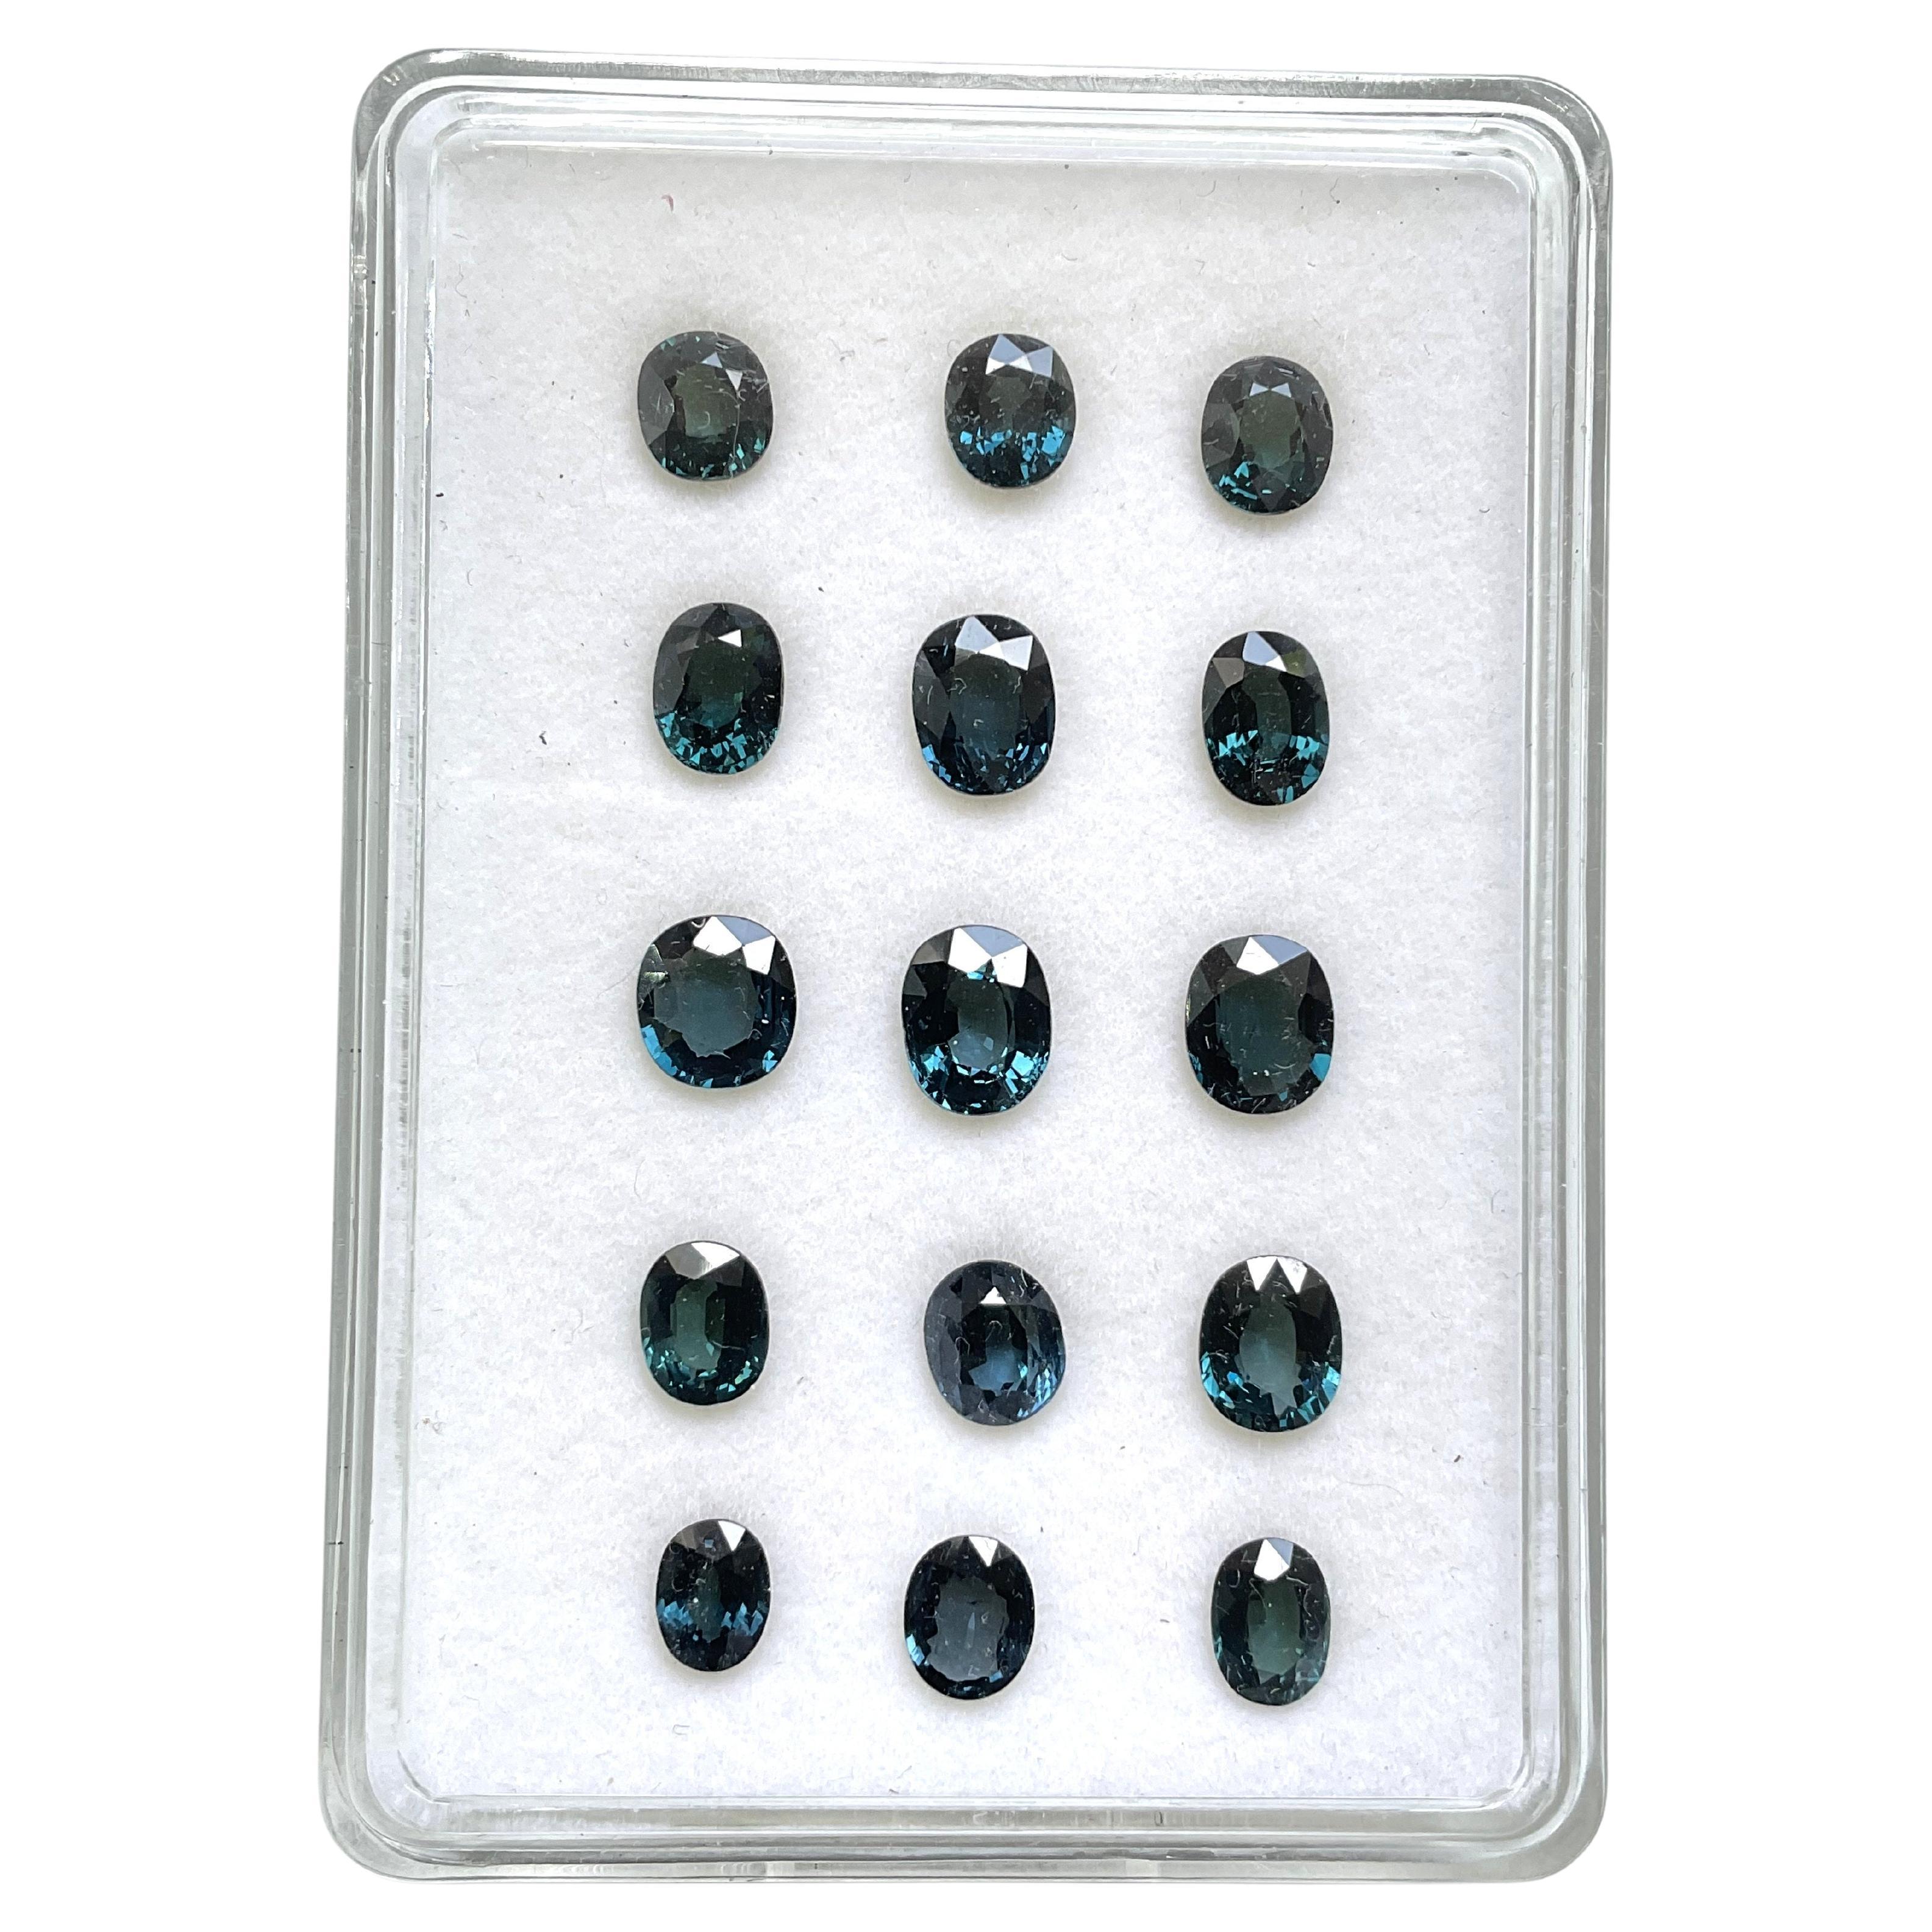 24.30 Carat Blue Spinel Tanzania Oval Faceted Natural Cut stone Fine Jewelry Gem For Sale